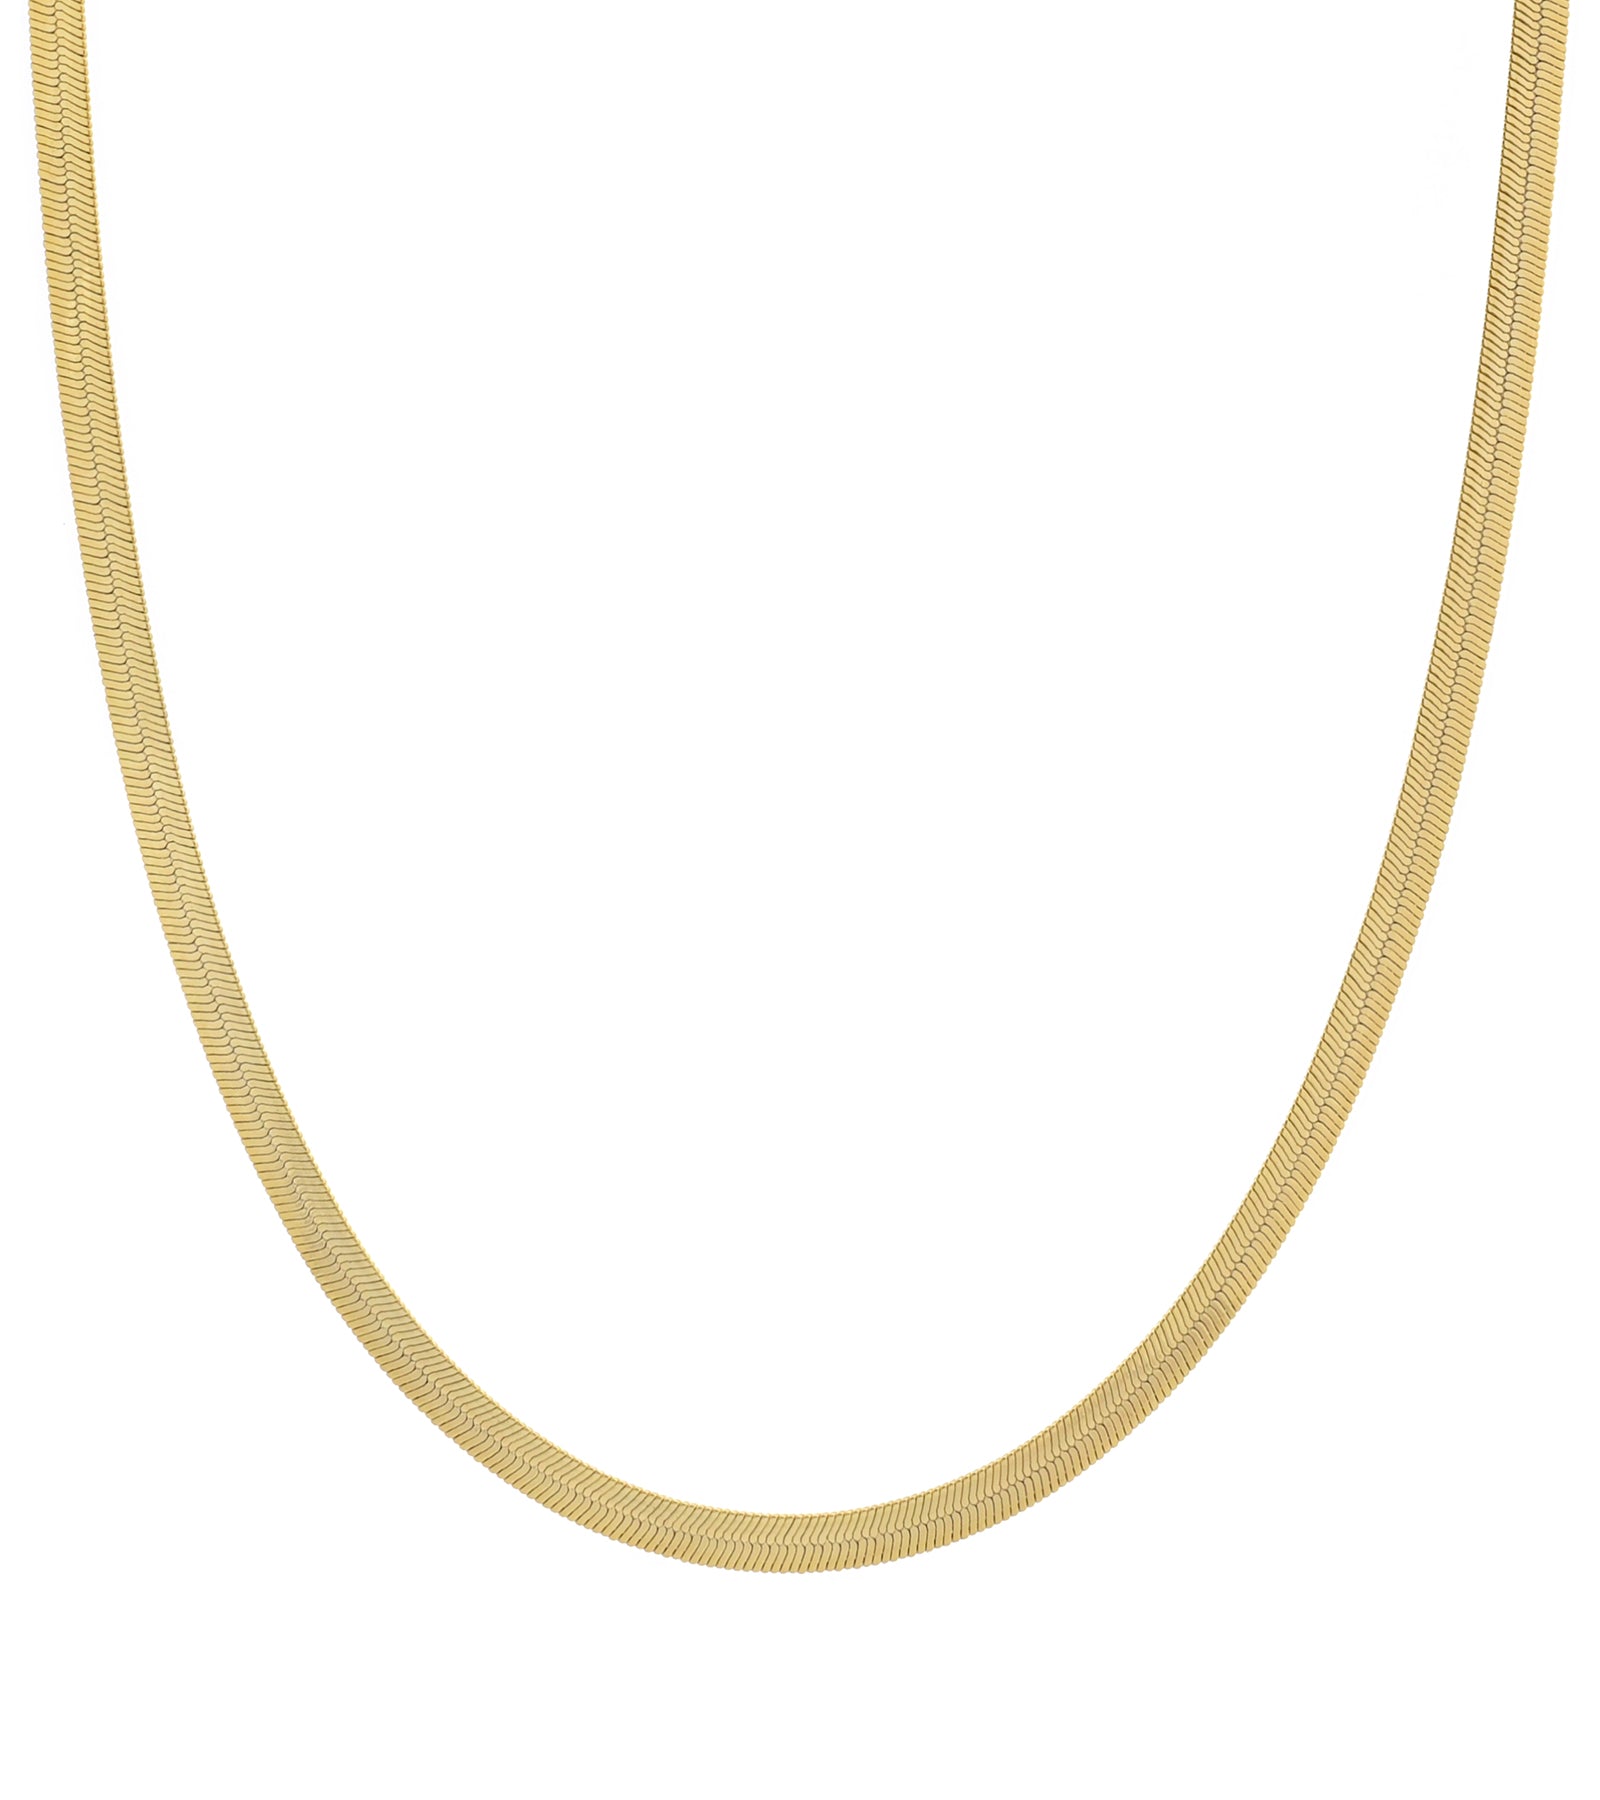 Herringbone Chain Necklace | 18K Gold Filled Herringbone Chain, Layered Necklace, Flat Snake Chain, Skinny Gold Chain Everyday Wear | Stainless Steel, Gold Filled 4mm 5mm - DLUXCA